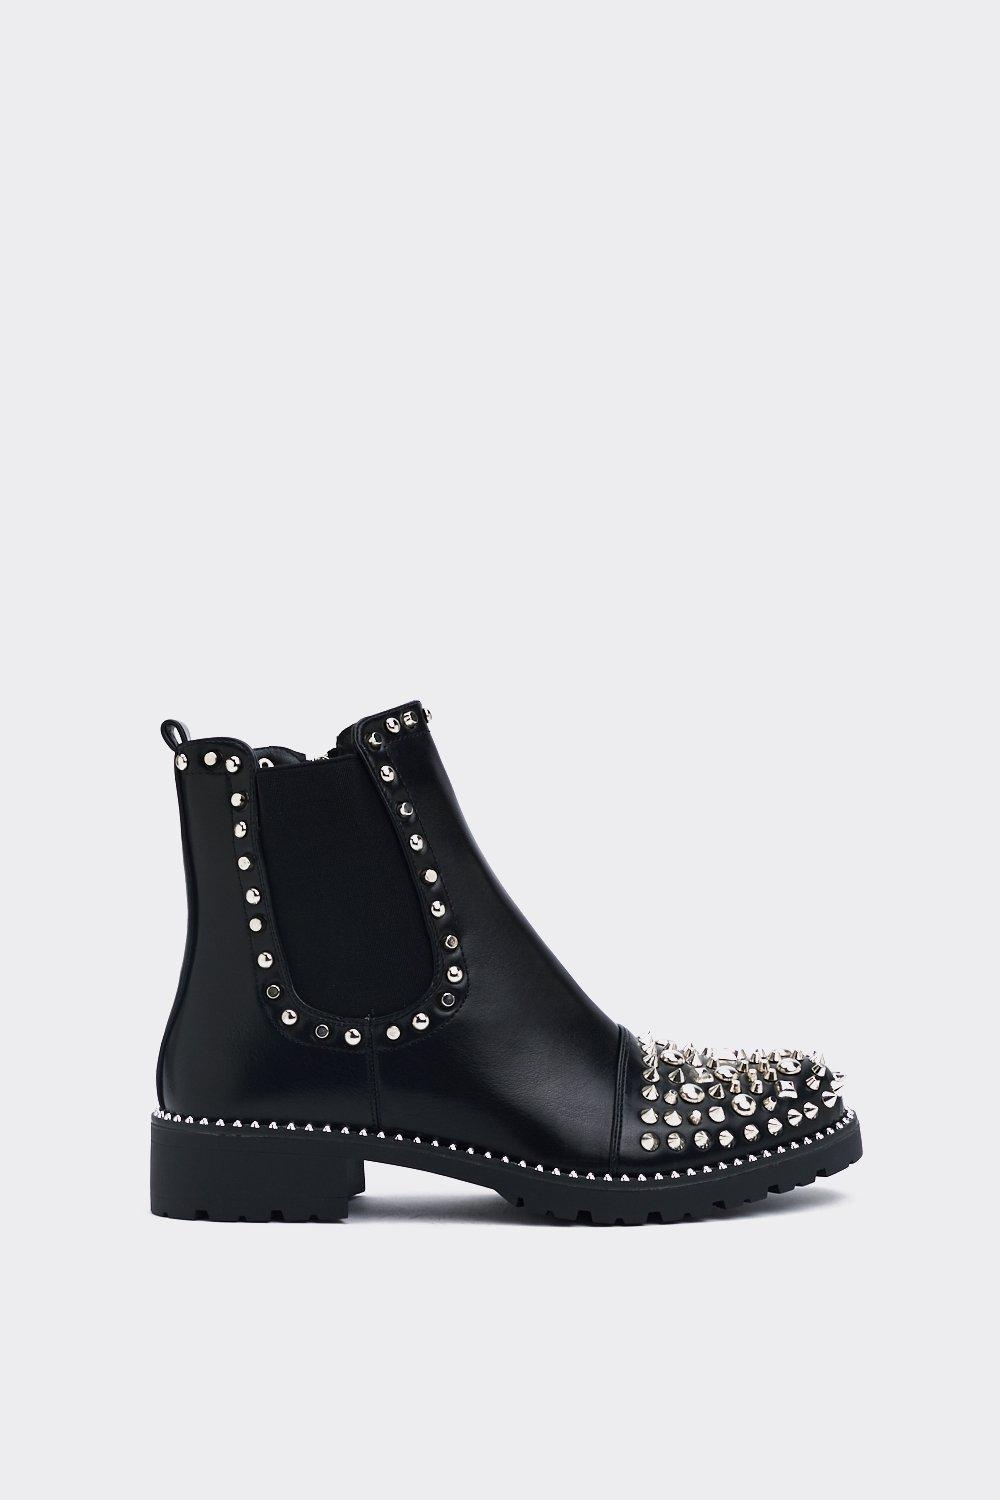 STUD-ING IN THE WAY OF CONTROL CHELSEA BOOT